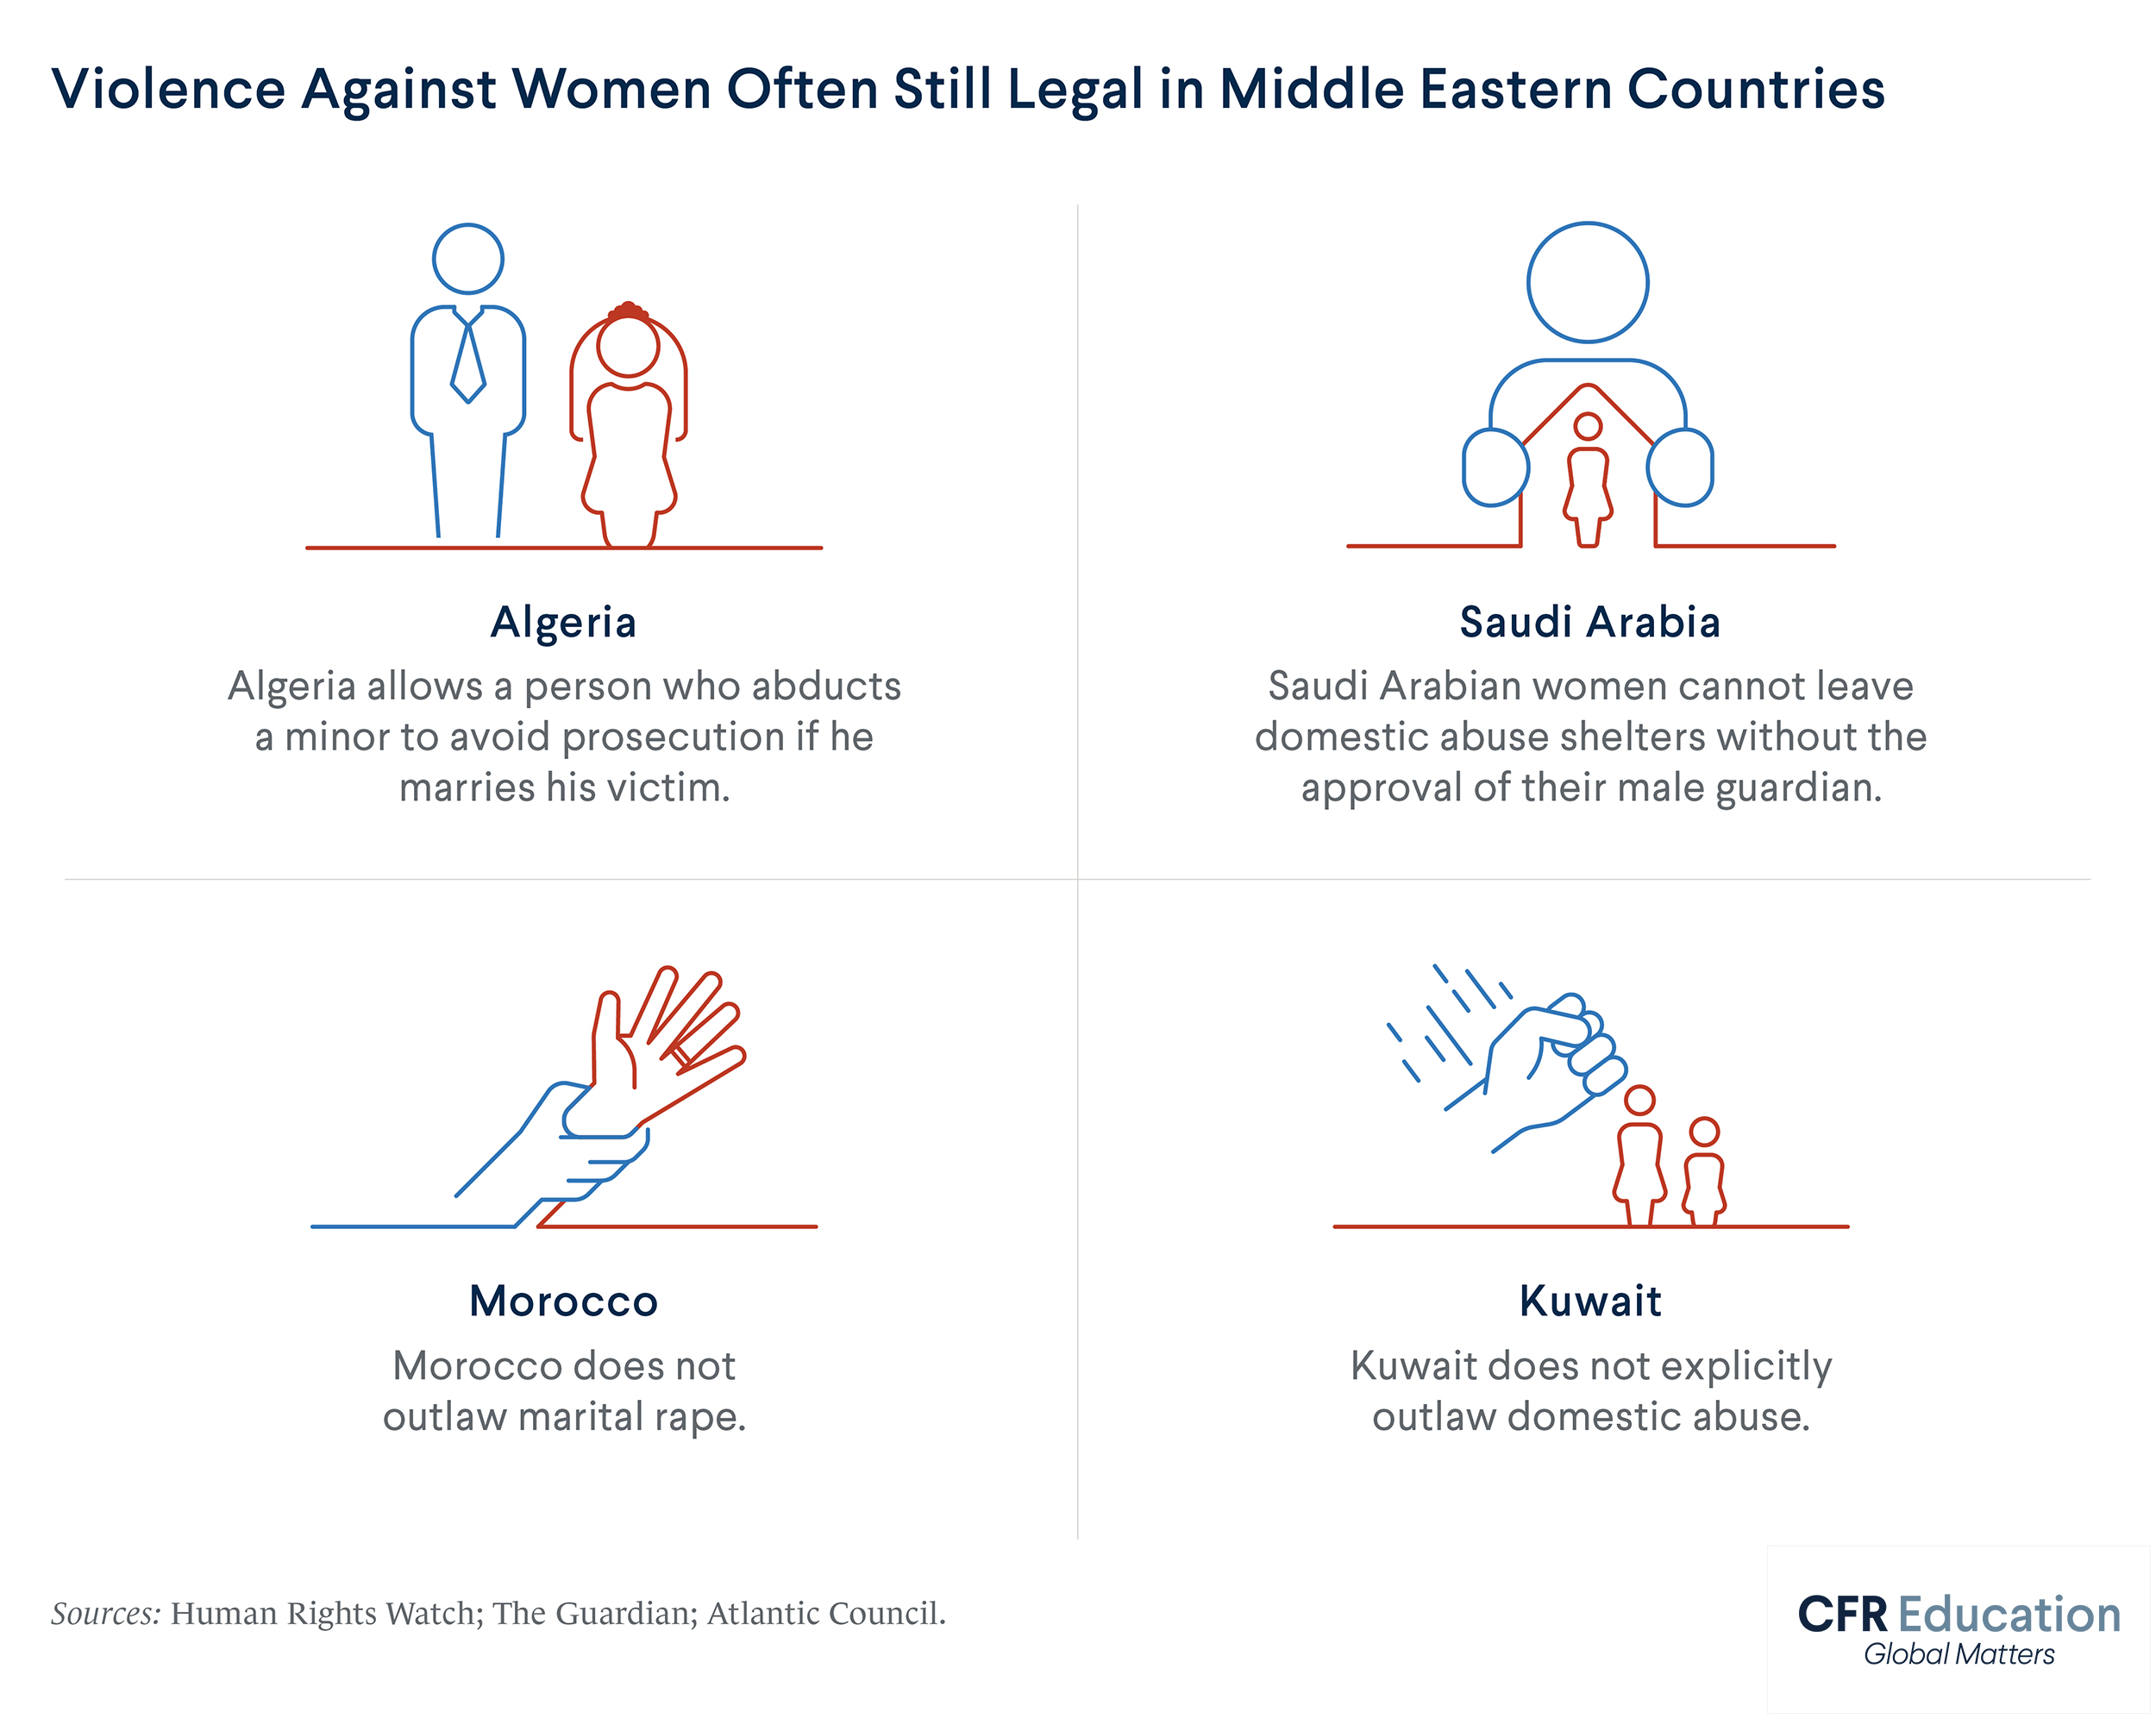 Infographic illustrates how violence against women is often still legal in Middle Eastern countries. For more info contact us at cfr_education@cfr.org.